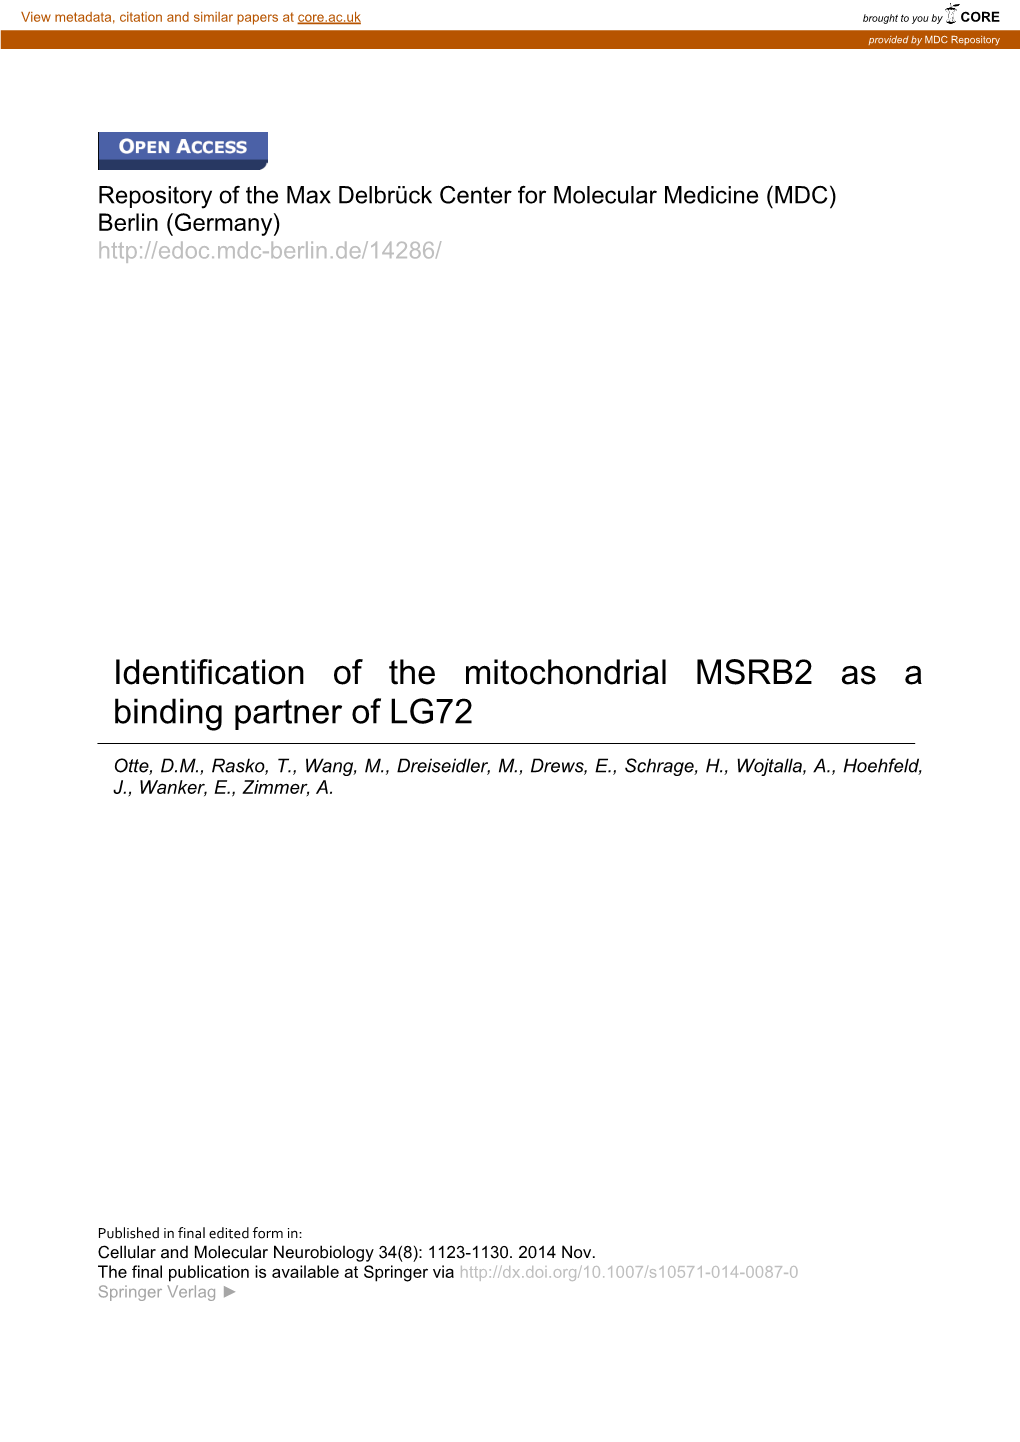 Identification of the Mitochondrial MSRB2 As a Binding Partner of LG72